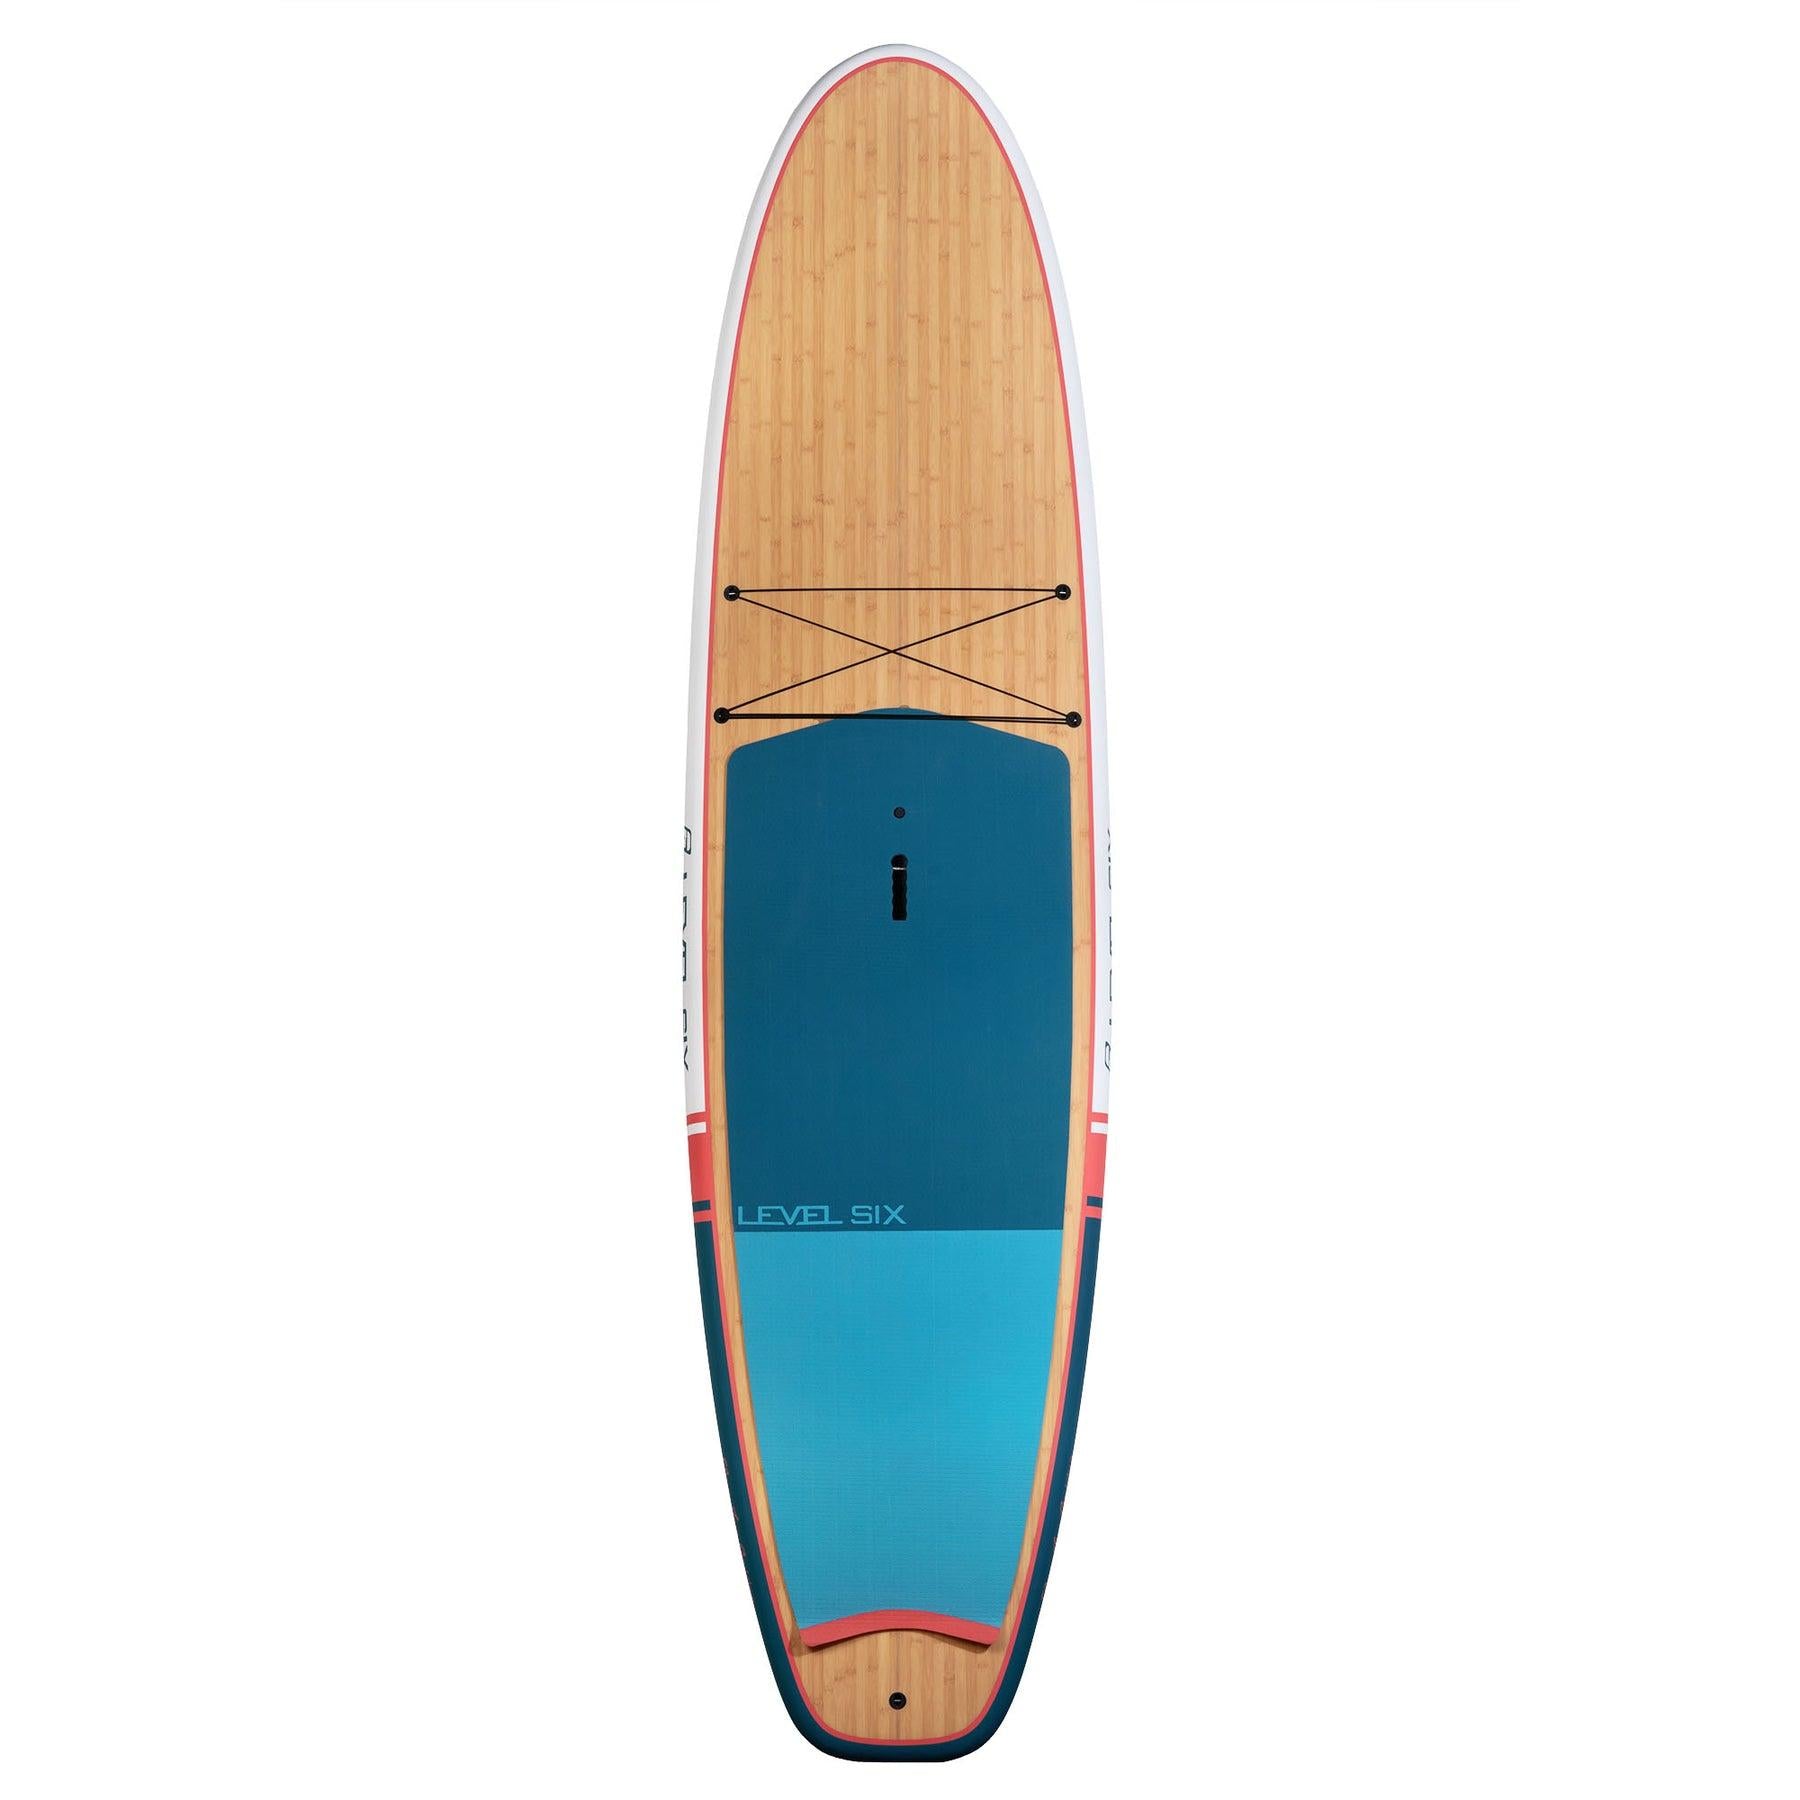 Level Six - Eleven Two XL Cruising SUP